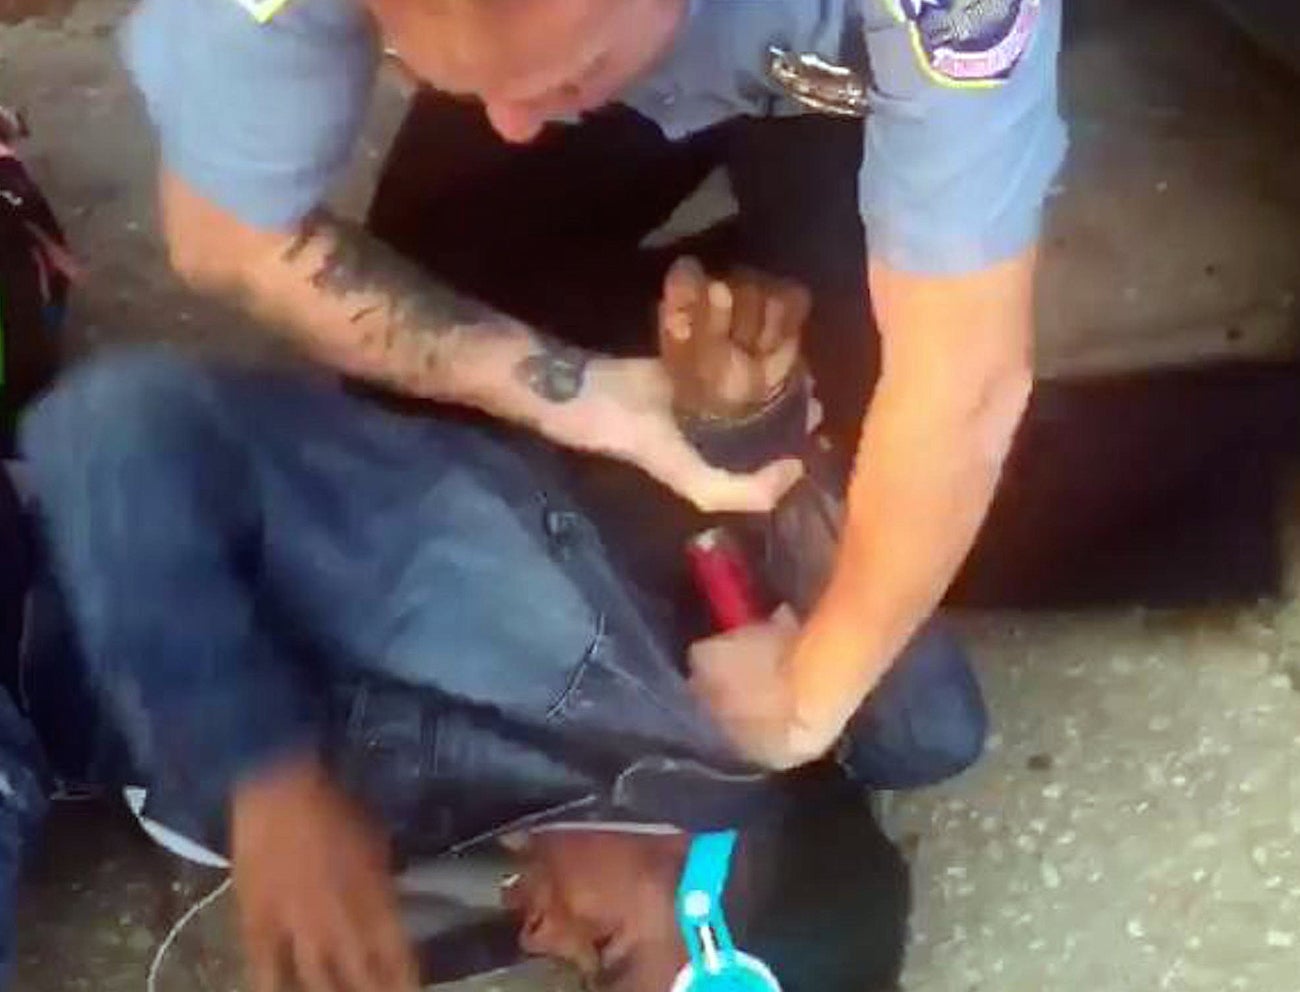 Cellphone video shows a young black man detained by police in Washington DC.